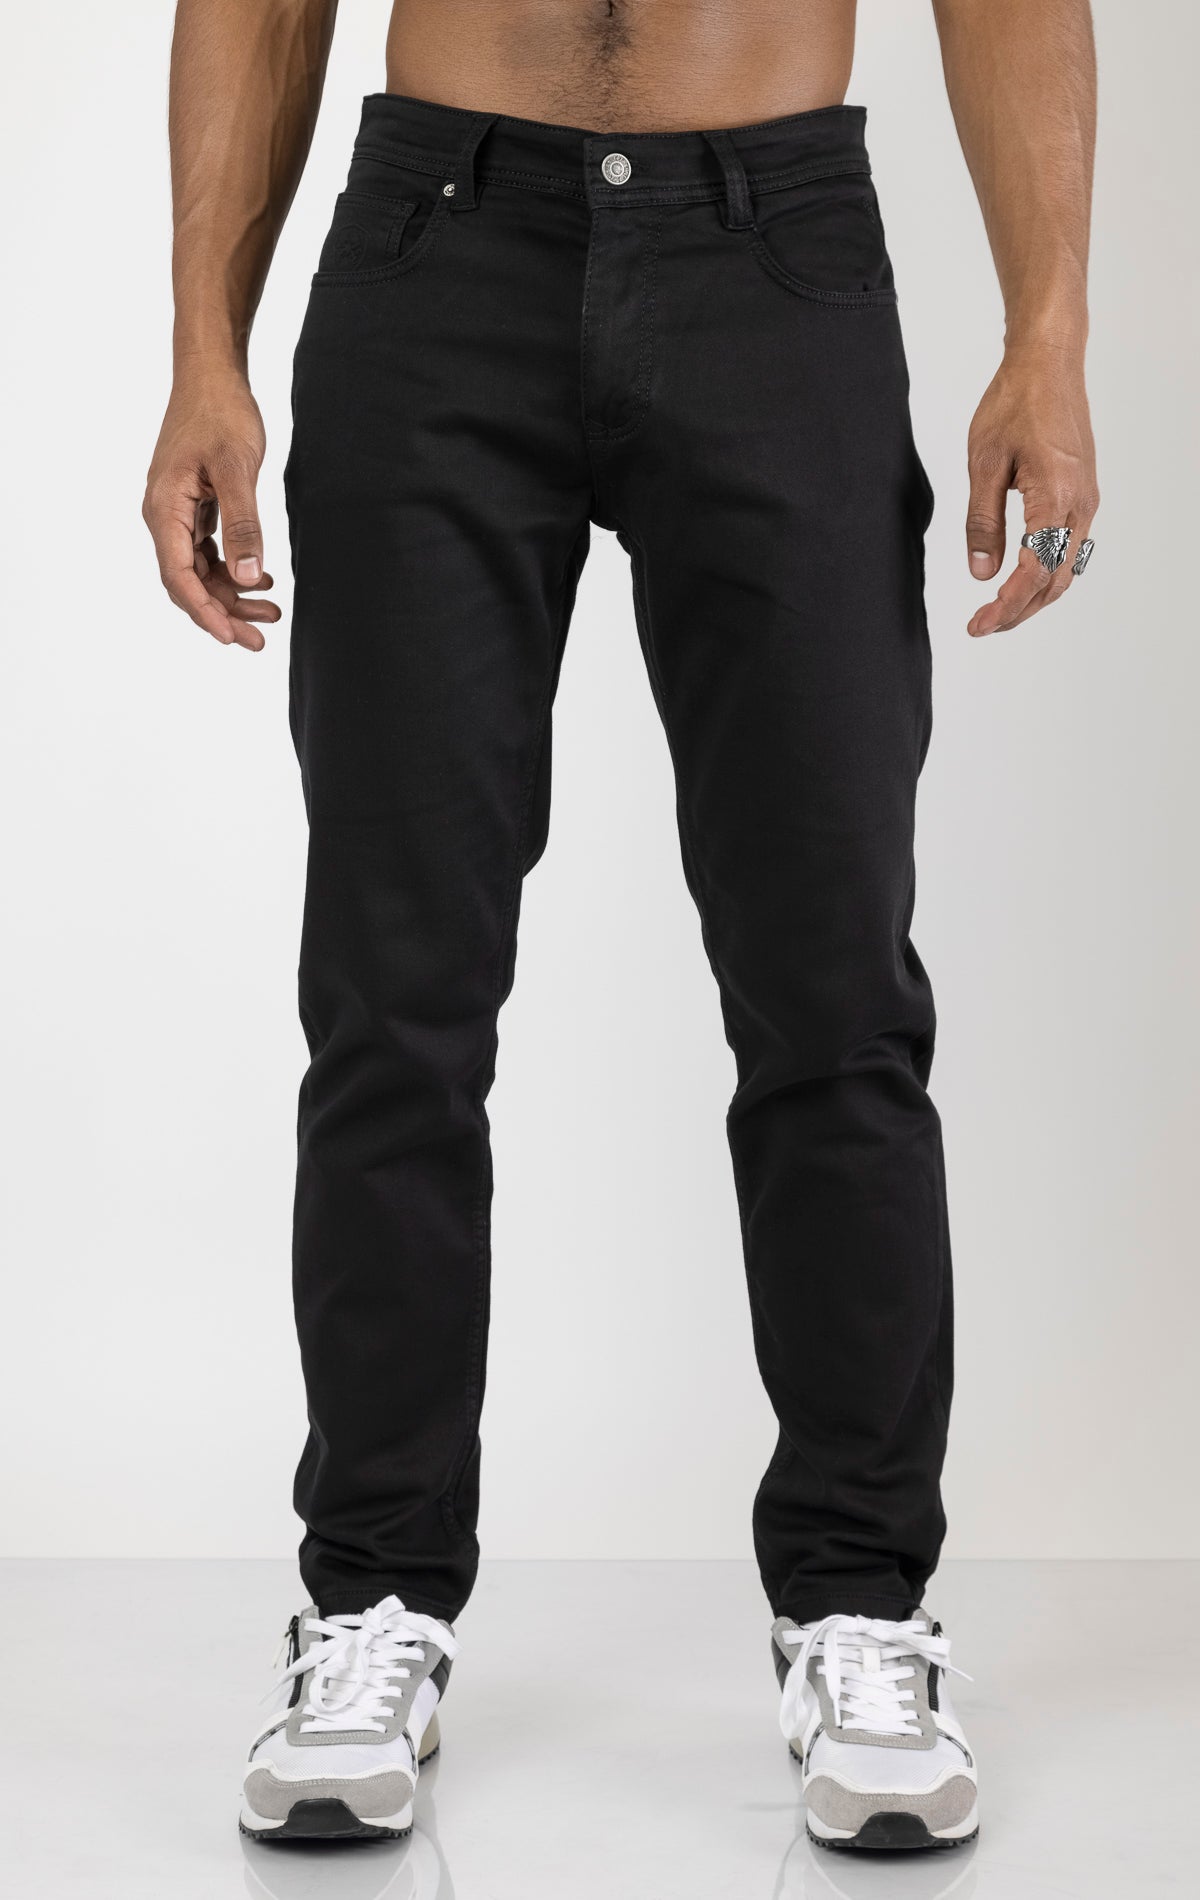 Men's super soft 5-pocket style pants in black color. The pants are made from a 98% cotton, 2% elastane blend and feature a tailored fit with a hint of stretch, classic 5-pocket styling (two front pockets, two back pockets, and a coin pocket).